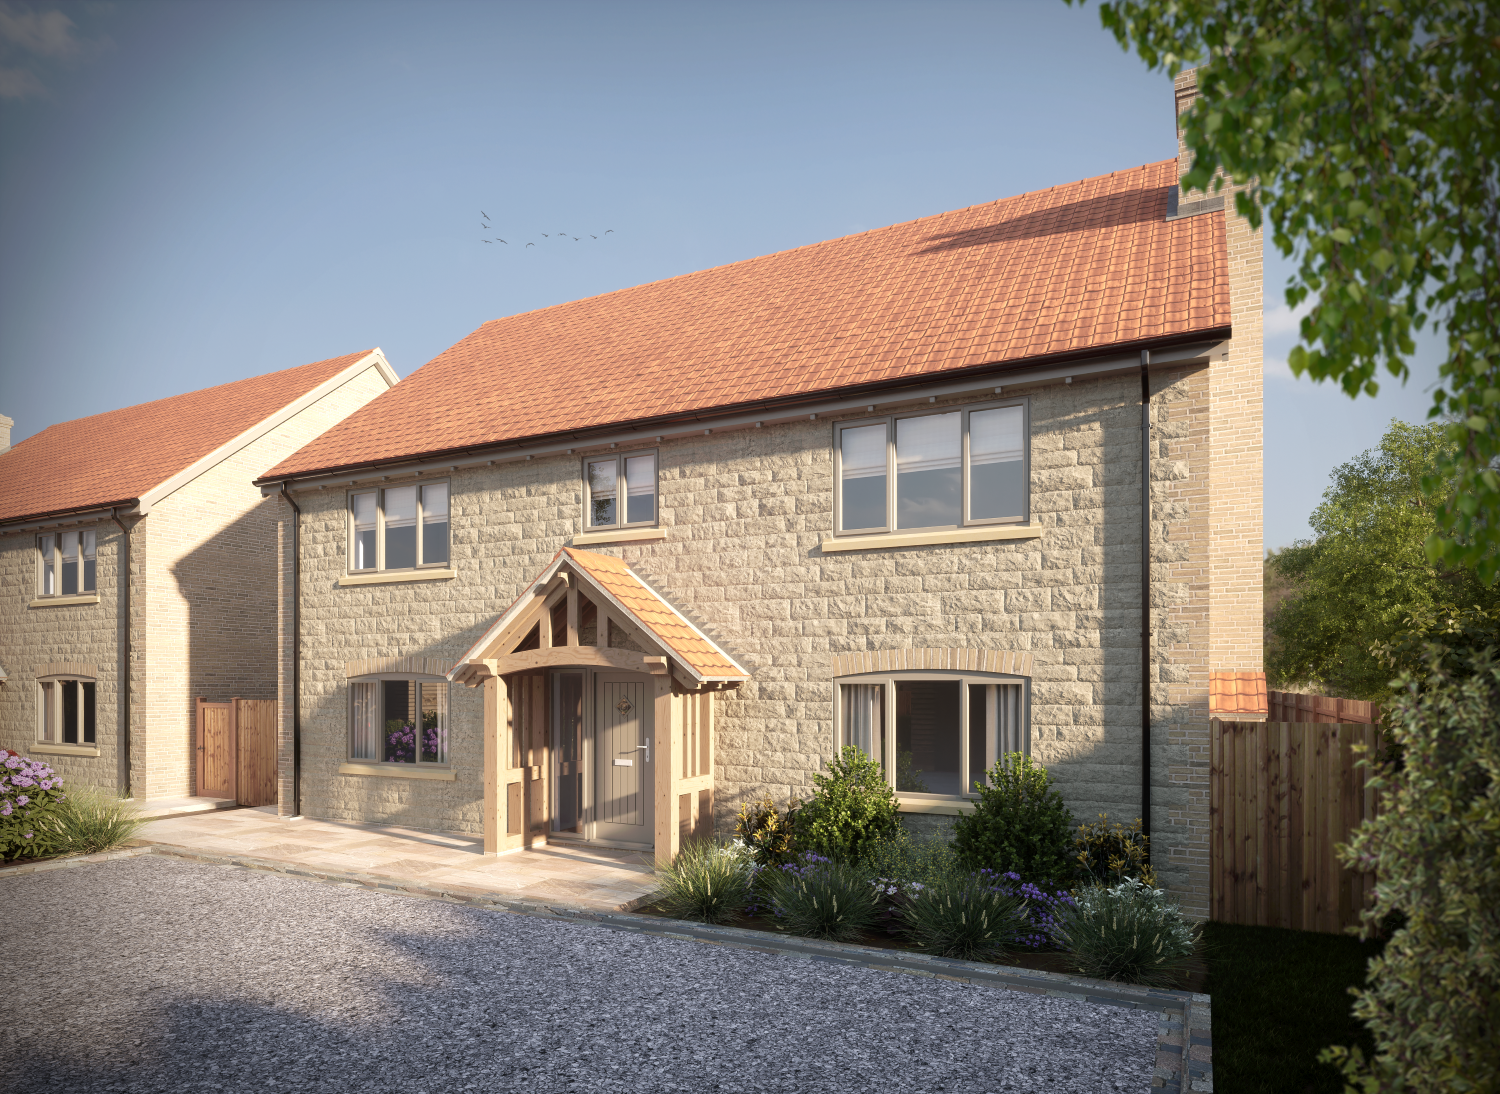 Plot 3 - with stone facing materials and oak porch at Manor farm, Scampton.